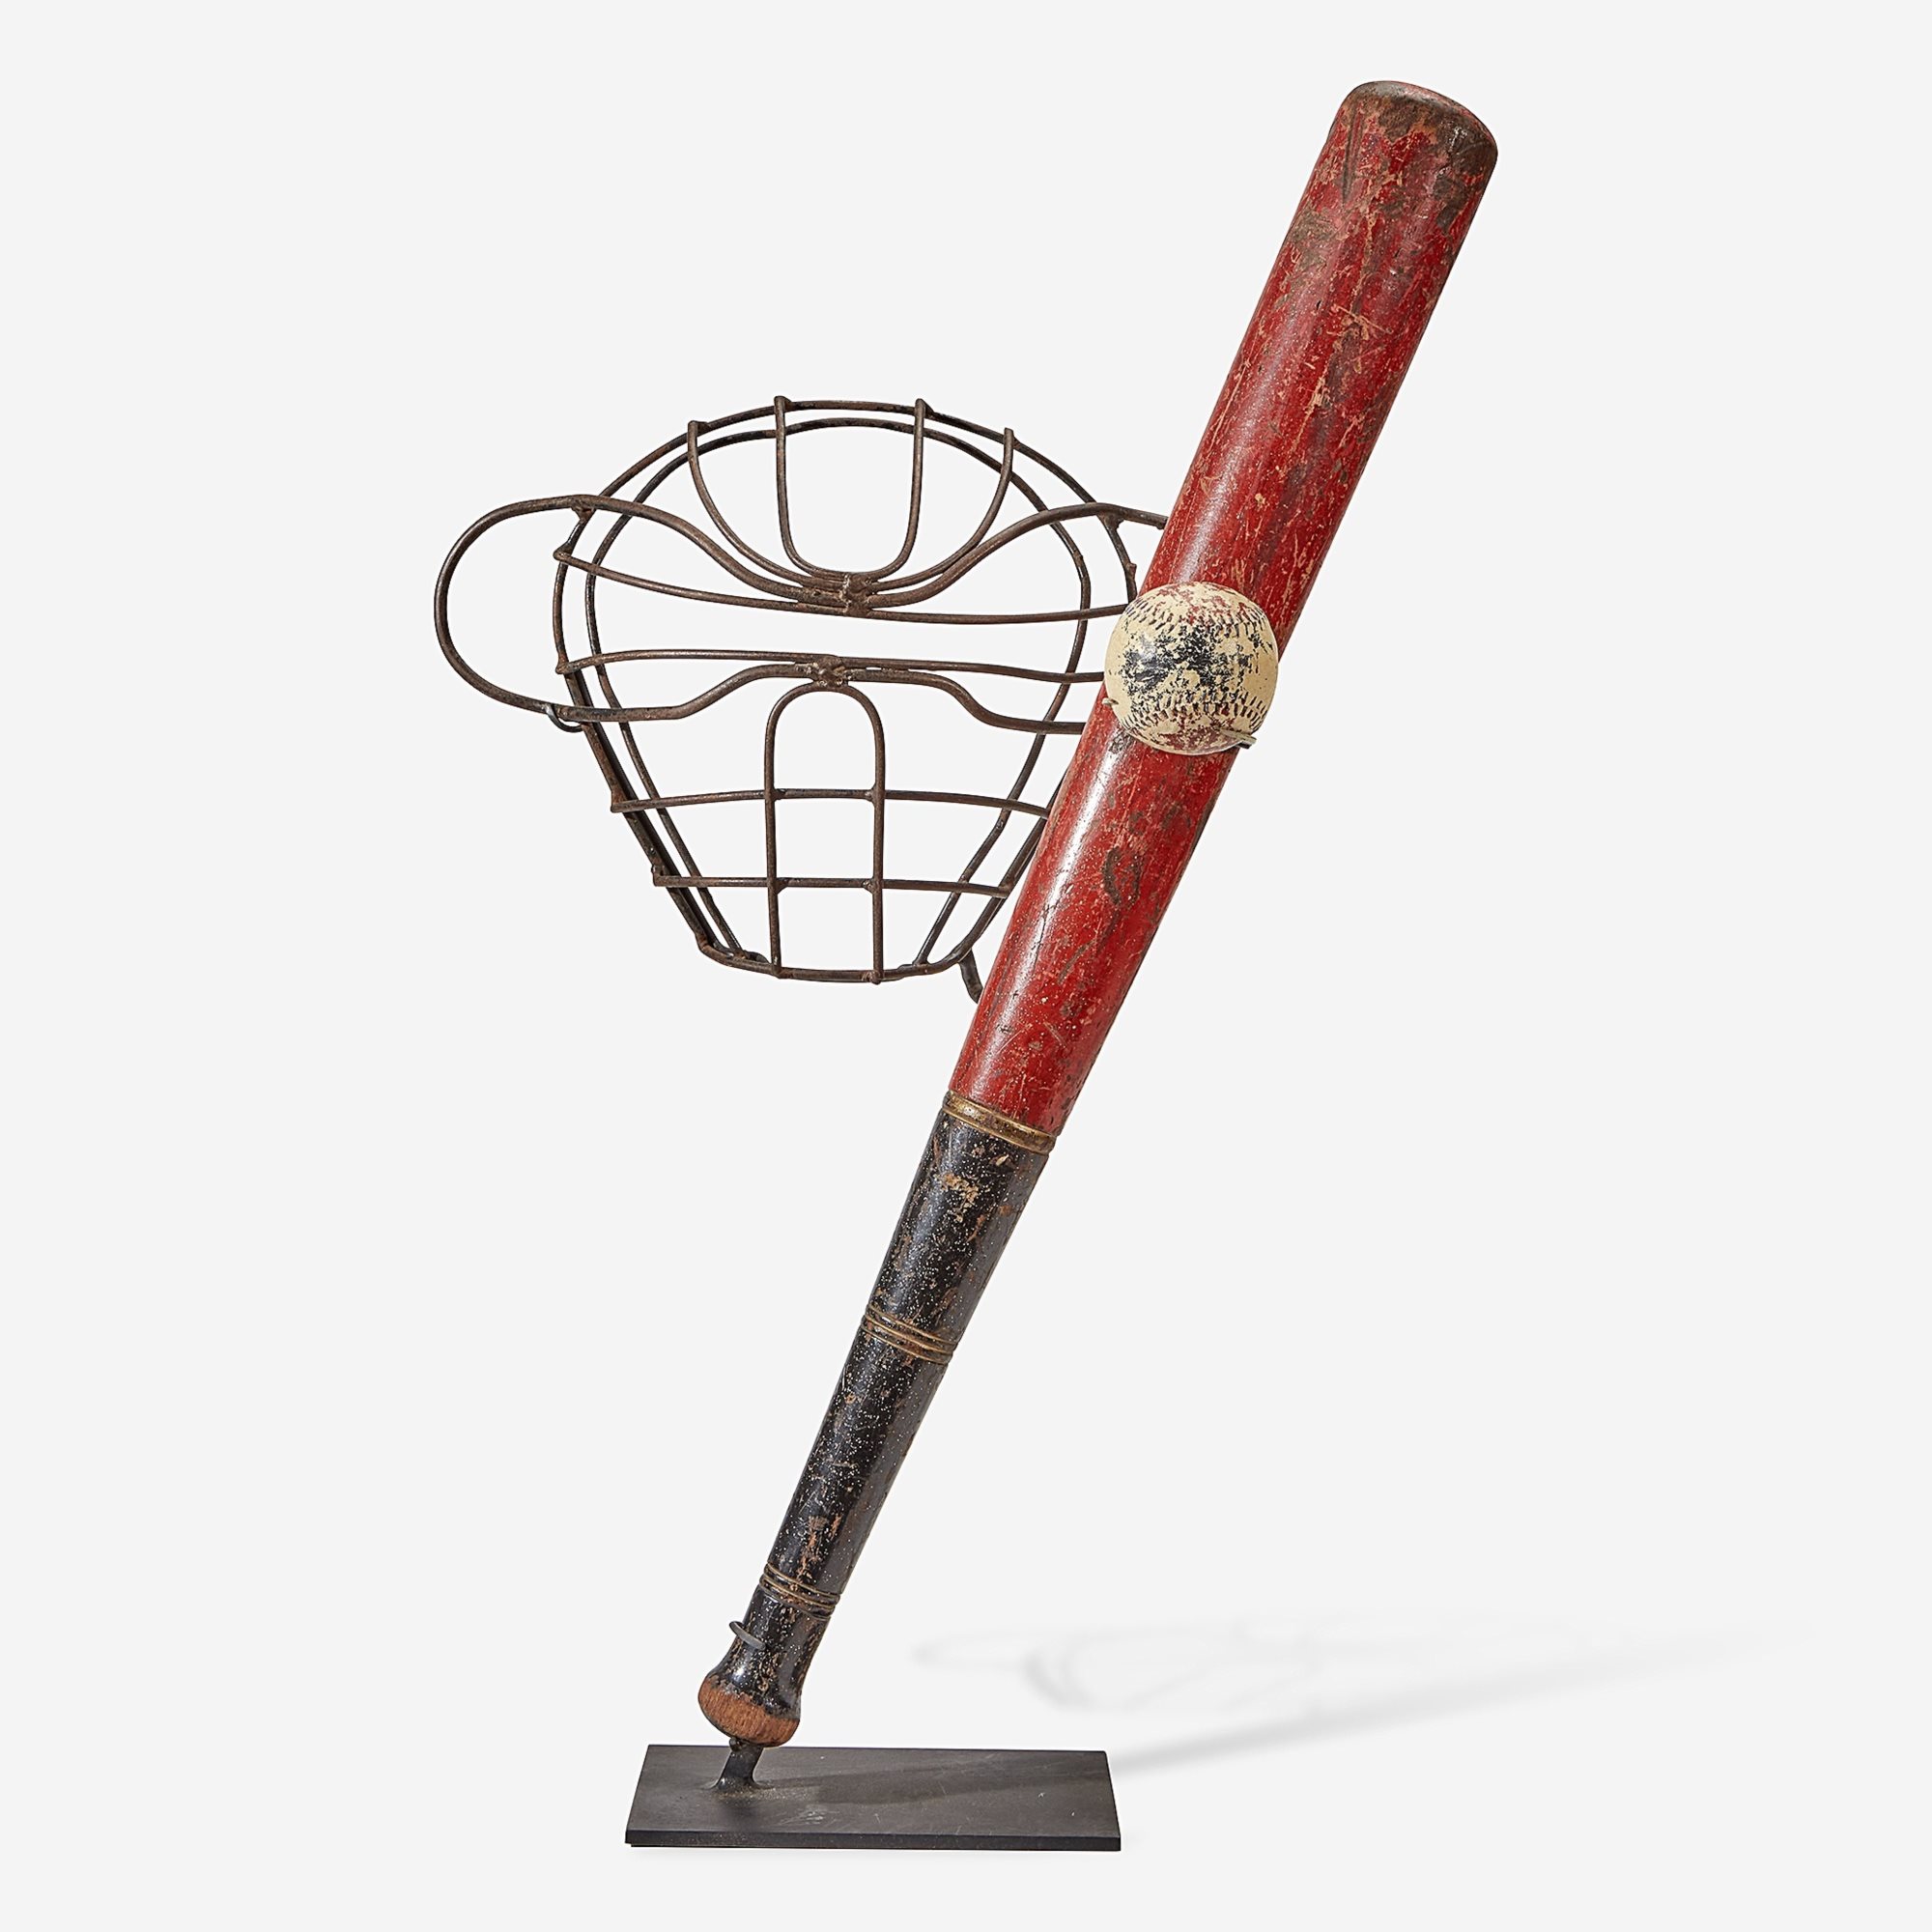 a mounted display of a twentieth century baseball bat, catcher’s mask and ball.